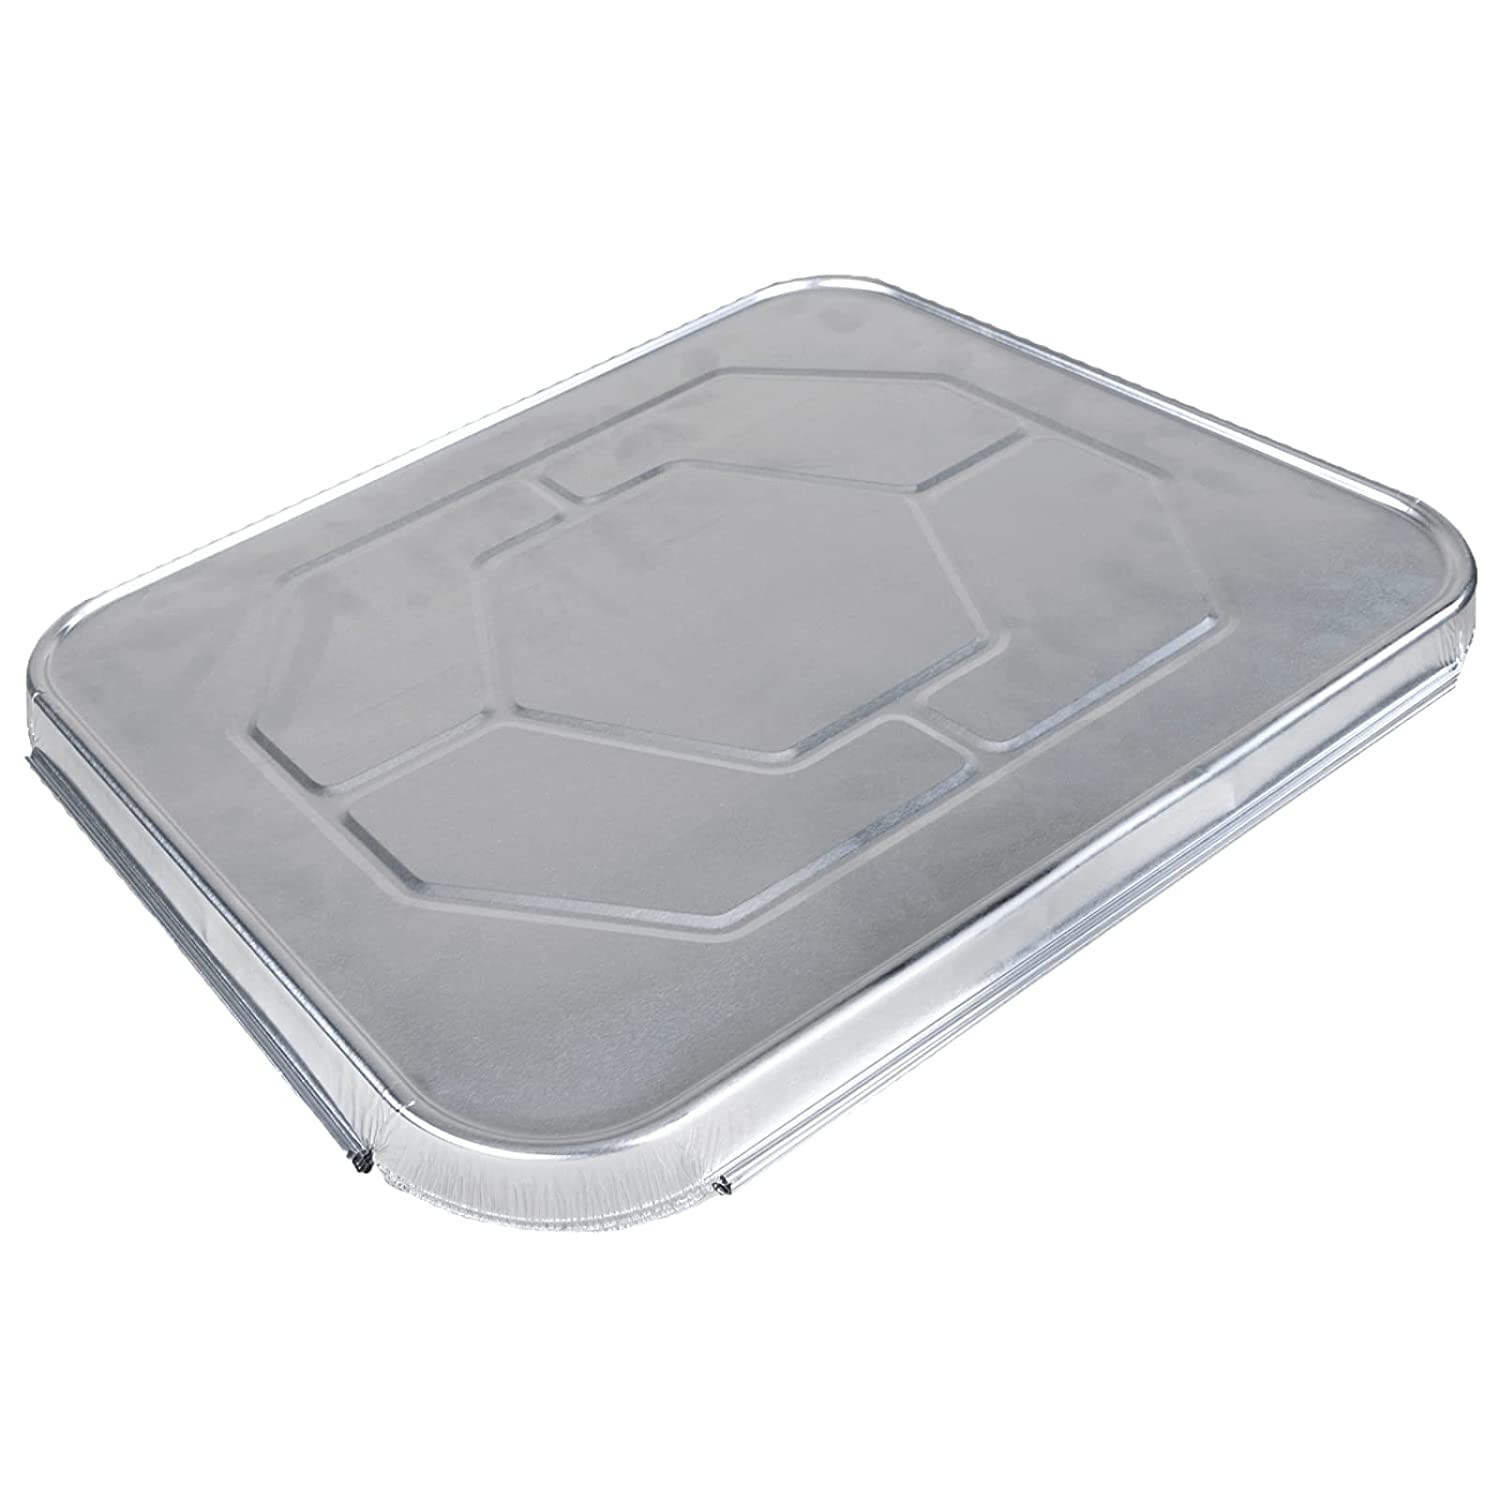 https://idlpack.com/image/cache/catalog/Products/Foil%20Pans%20and%20Trays/617+yoogt+L._SL1500_-1500x1500.jpg